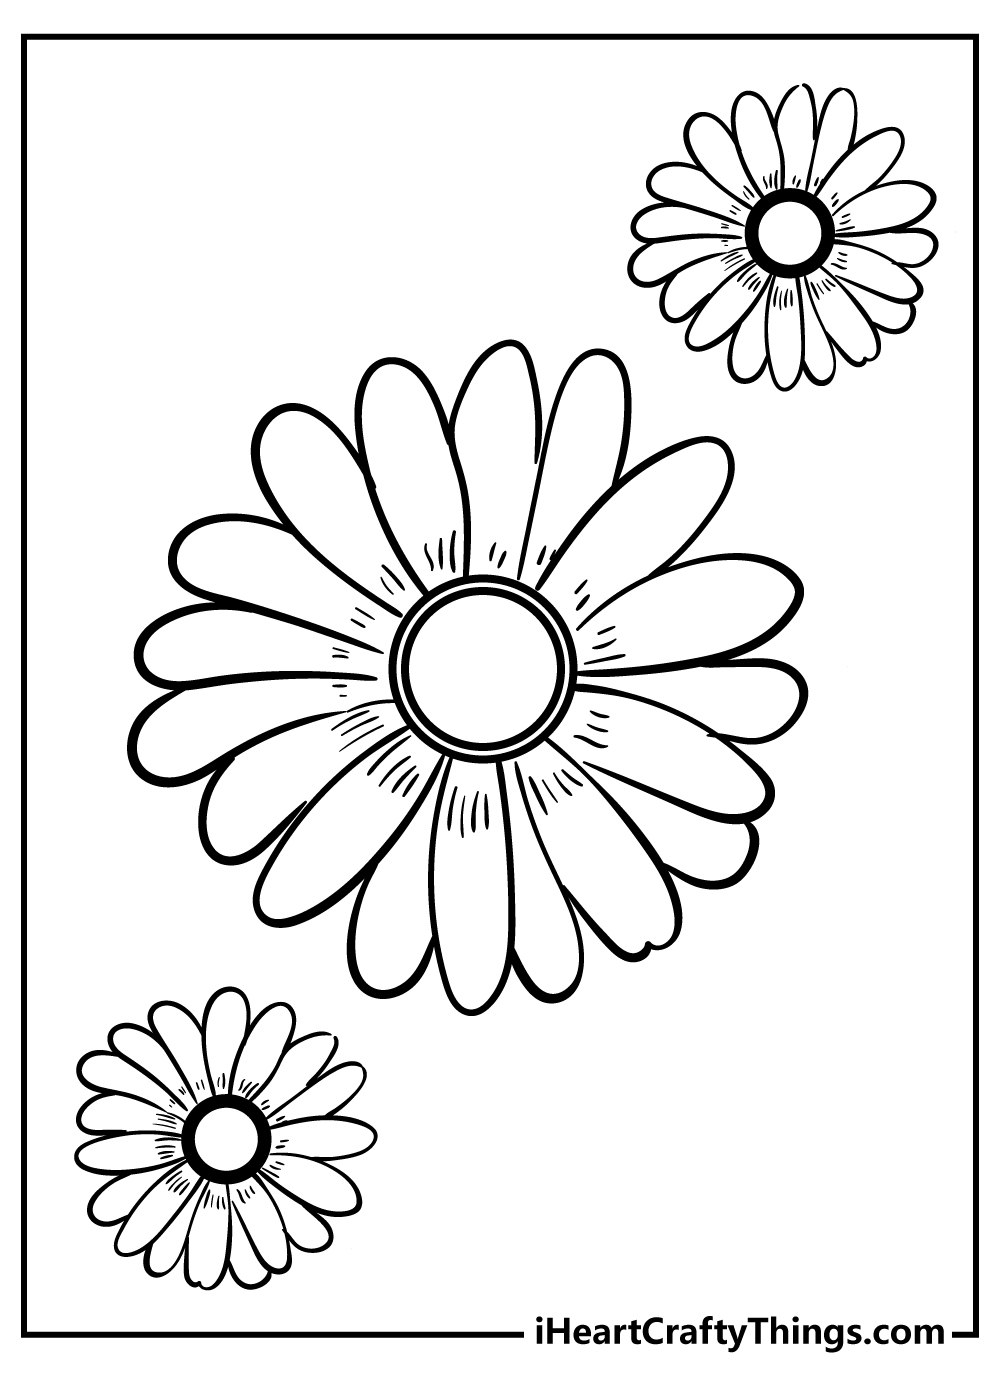 Daisy Easy Coloring Pages